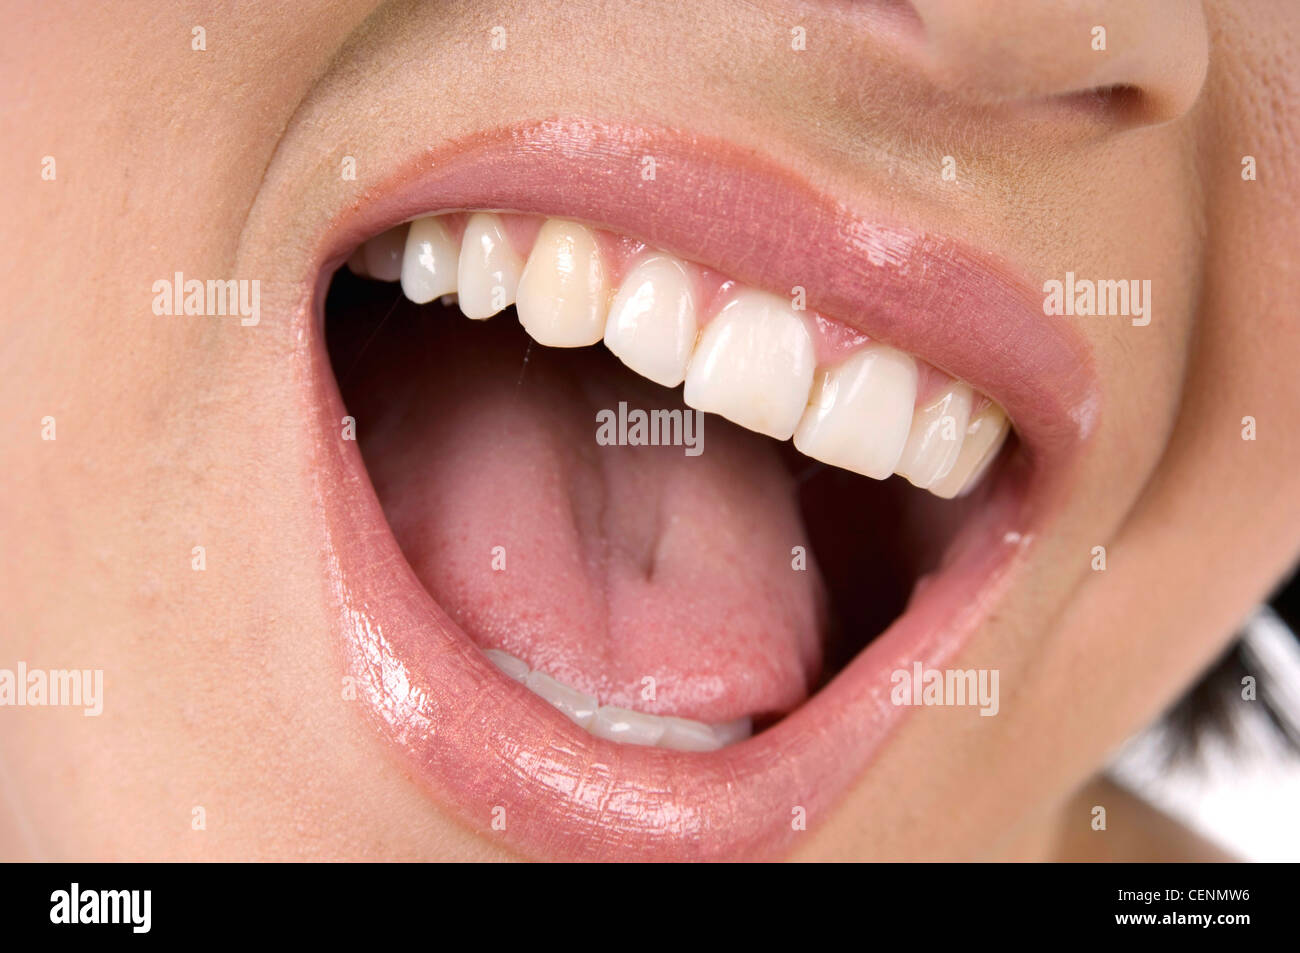 Female Open Mouth 98